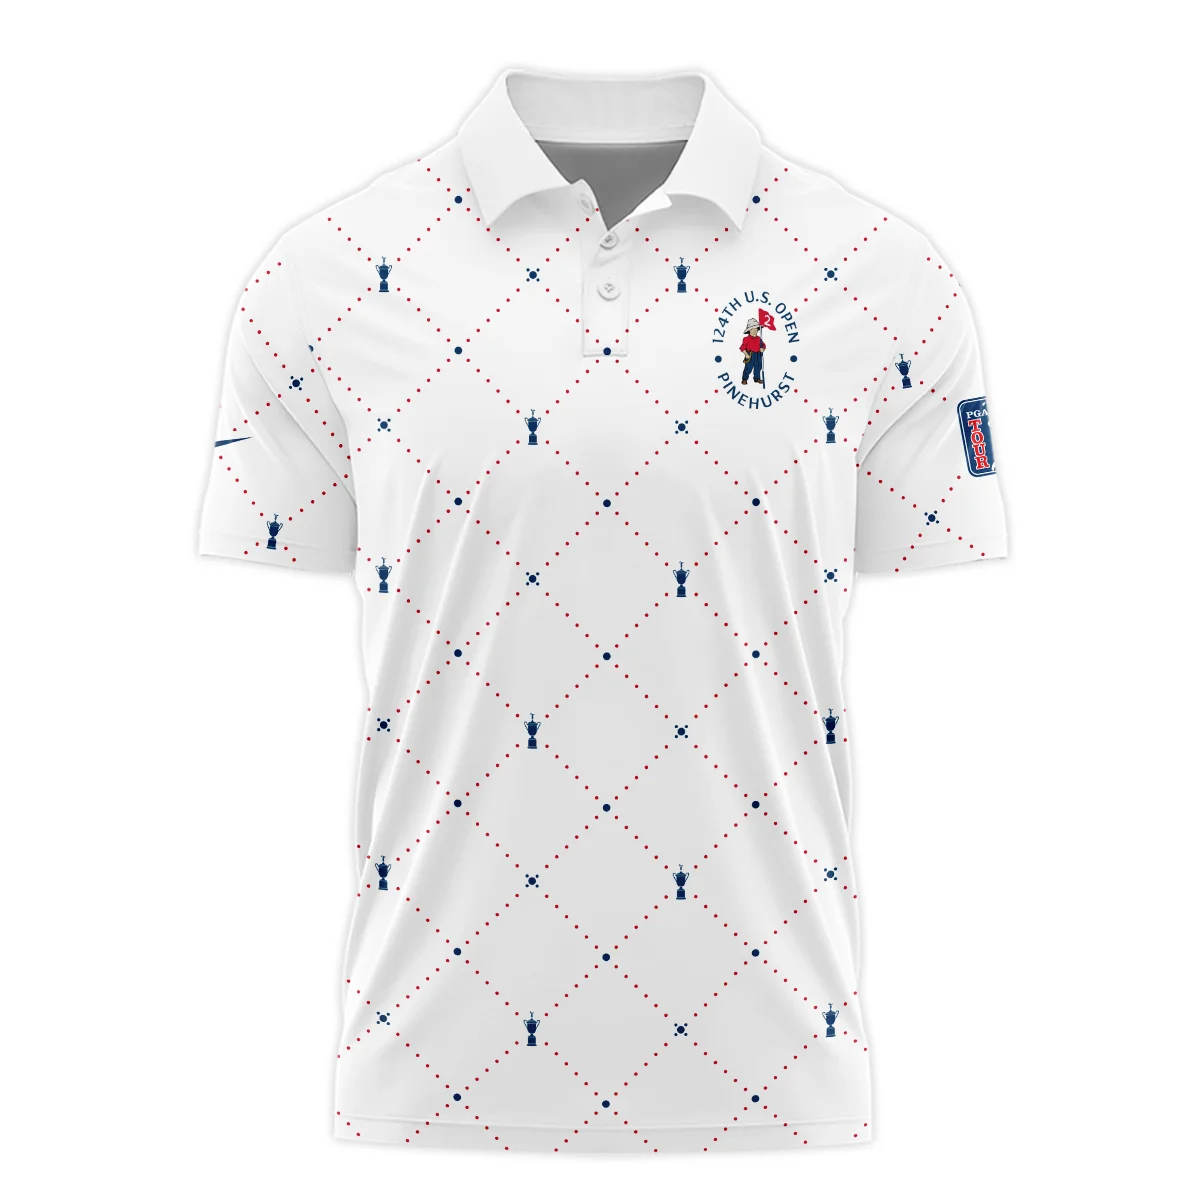 Argyle Pattern With Cup 124th U.S. Open Pinehurst Nike Vneck Long Polo Shirt Style Classic Long Polo Shirt For Men